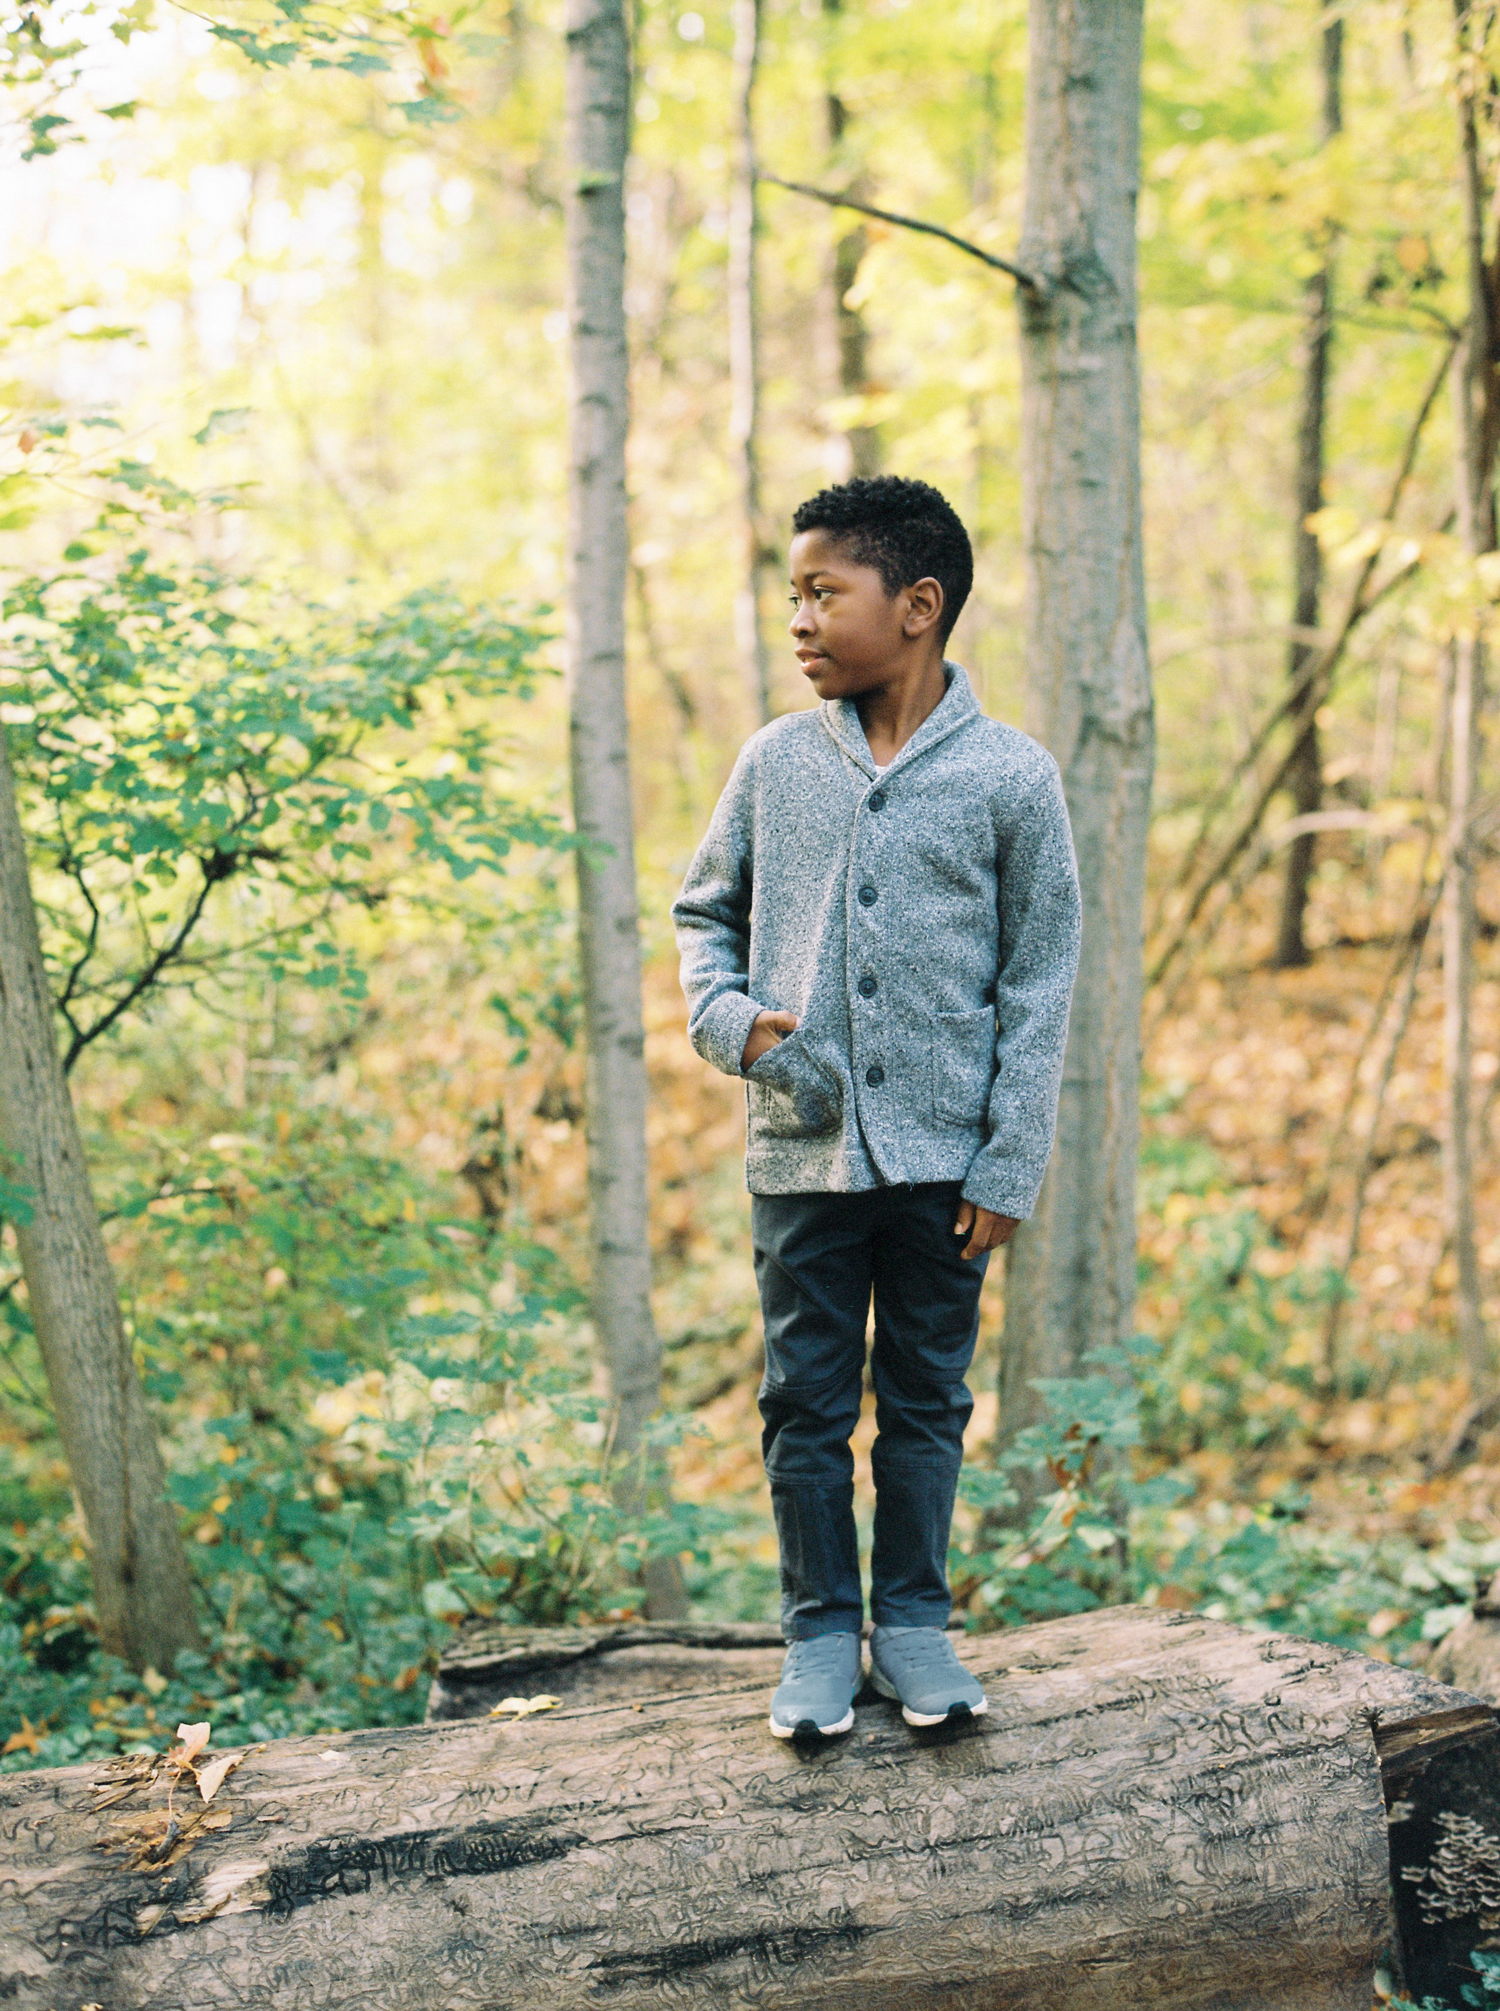 black boy wearing gray sweater and black pants standing on a fallen tree in the forest.